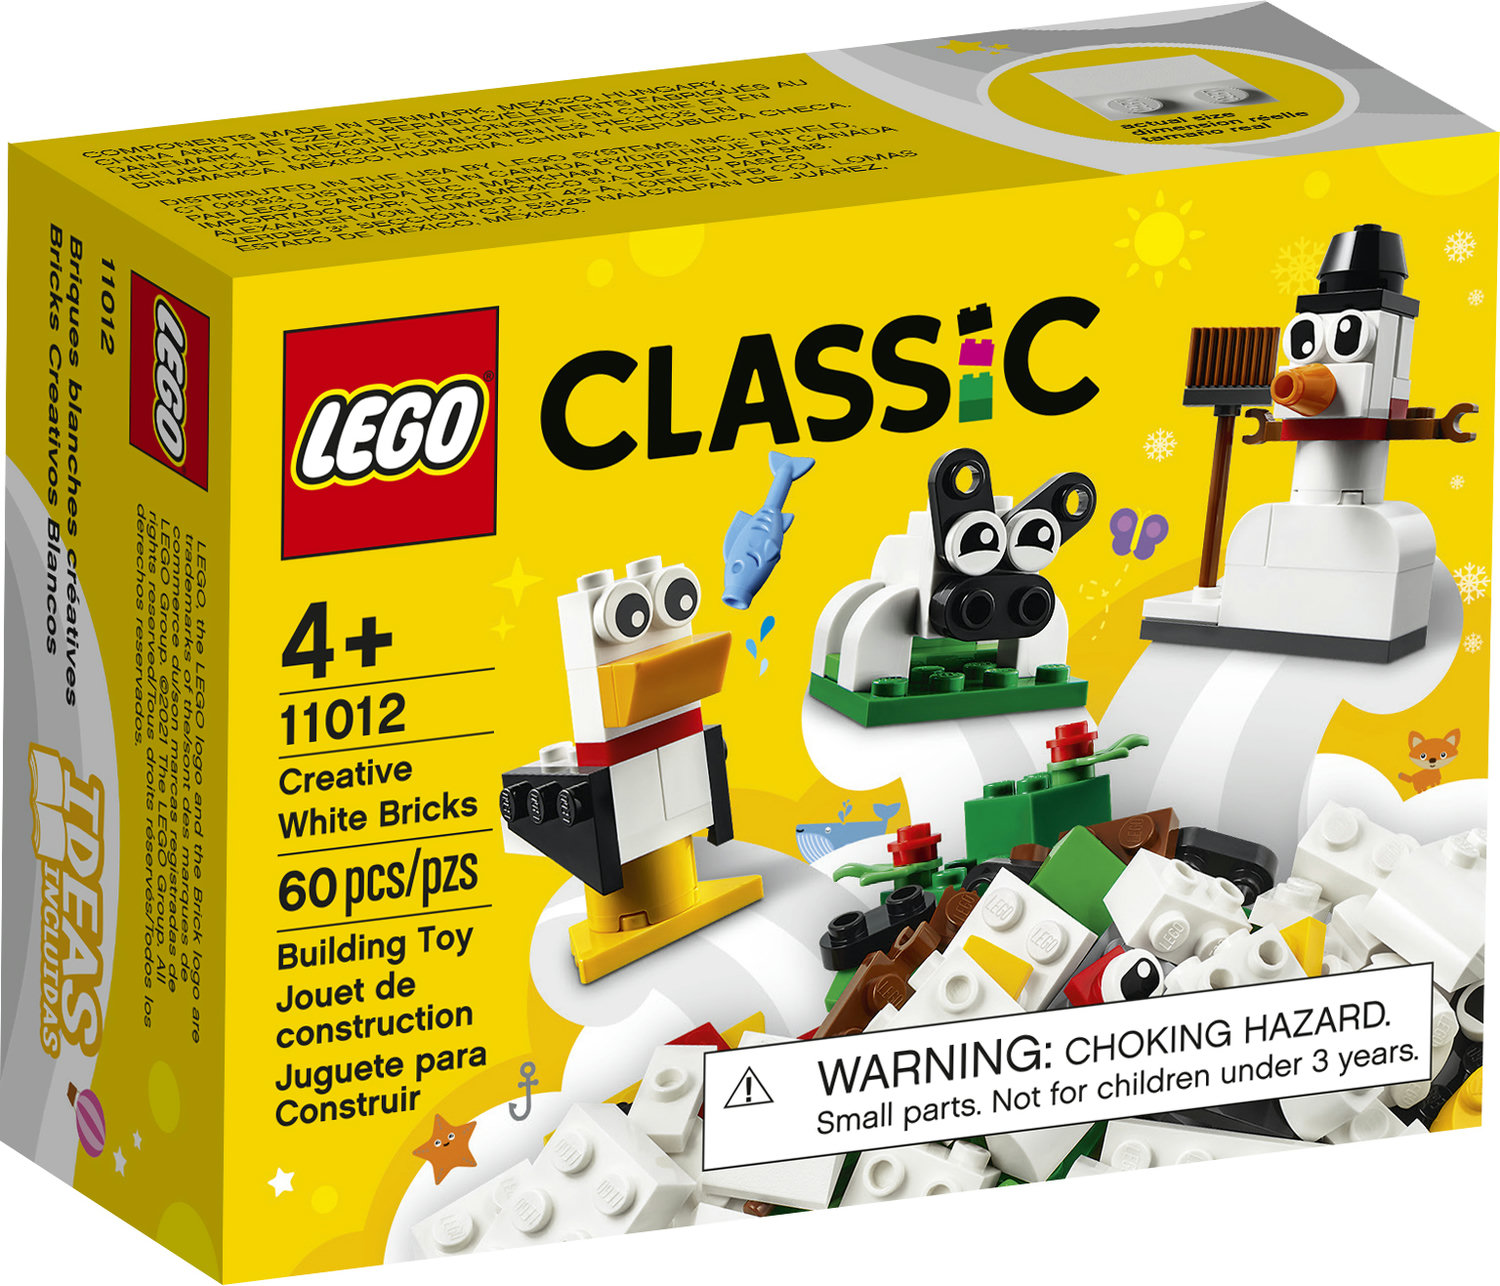 LEGO Classic Creative White Bricks 11012 Building Toy to Inspire Creative Play (60 Pieces) - image 4 of 5